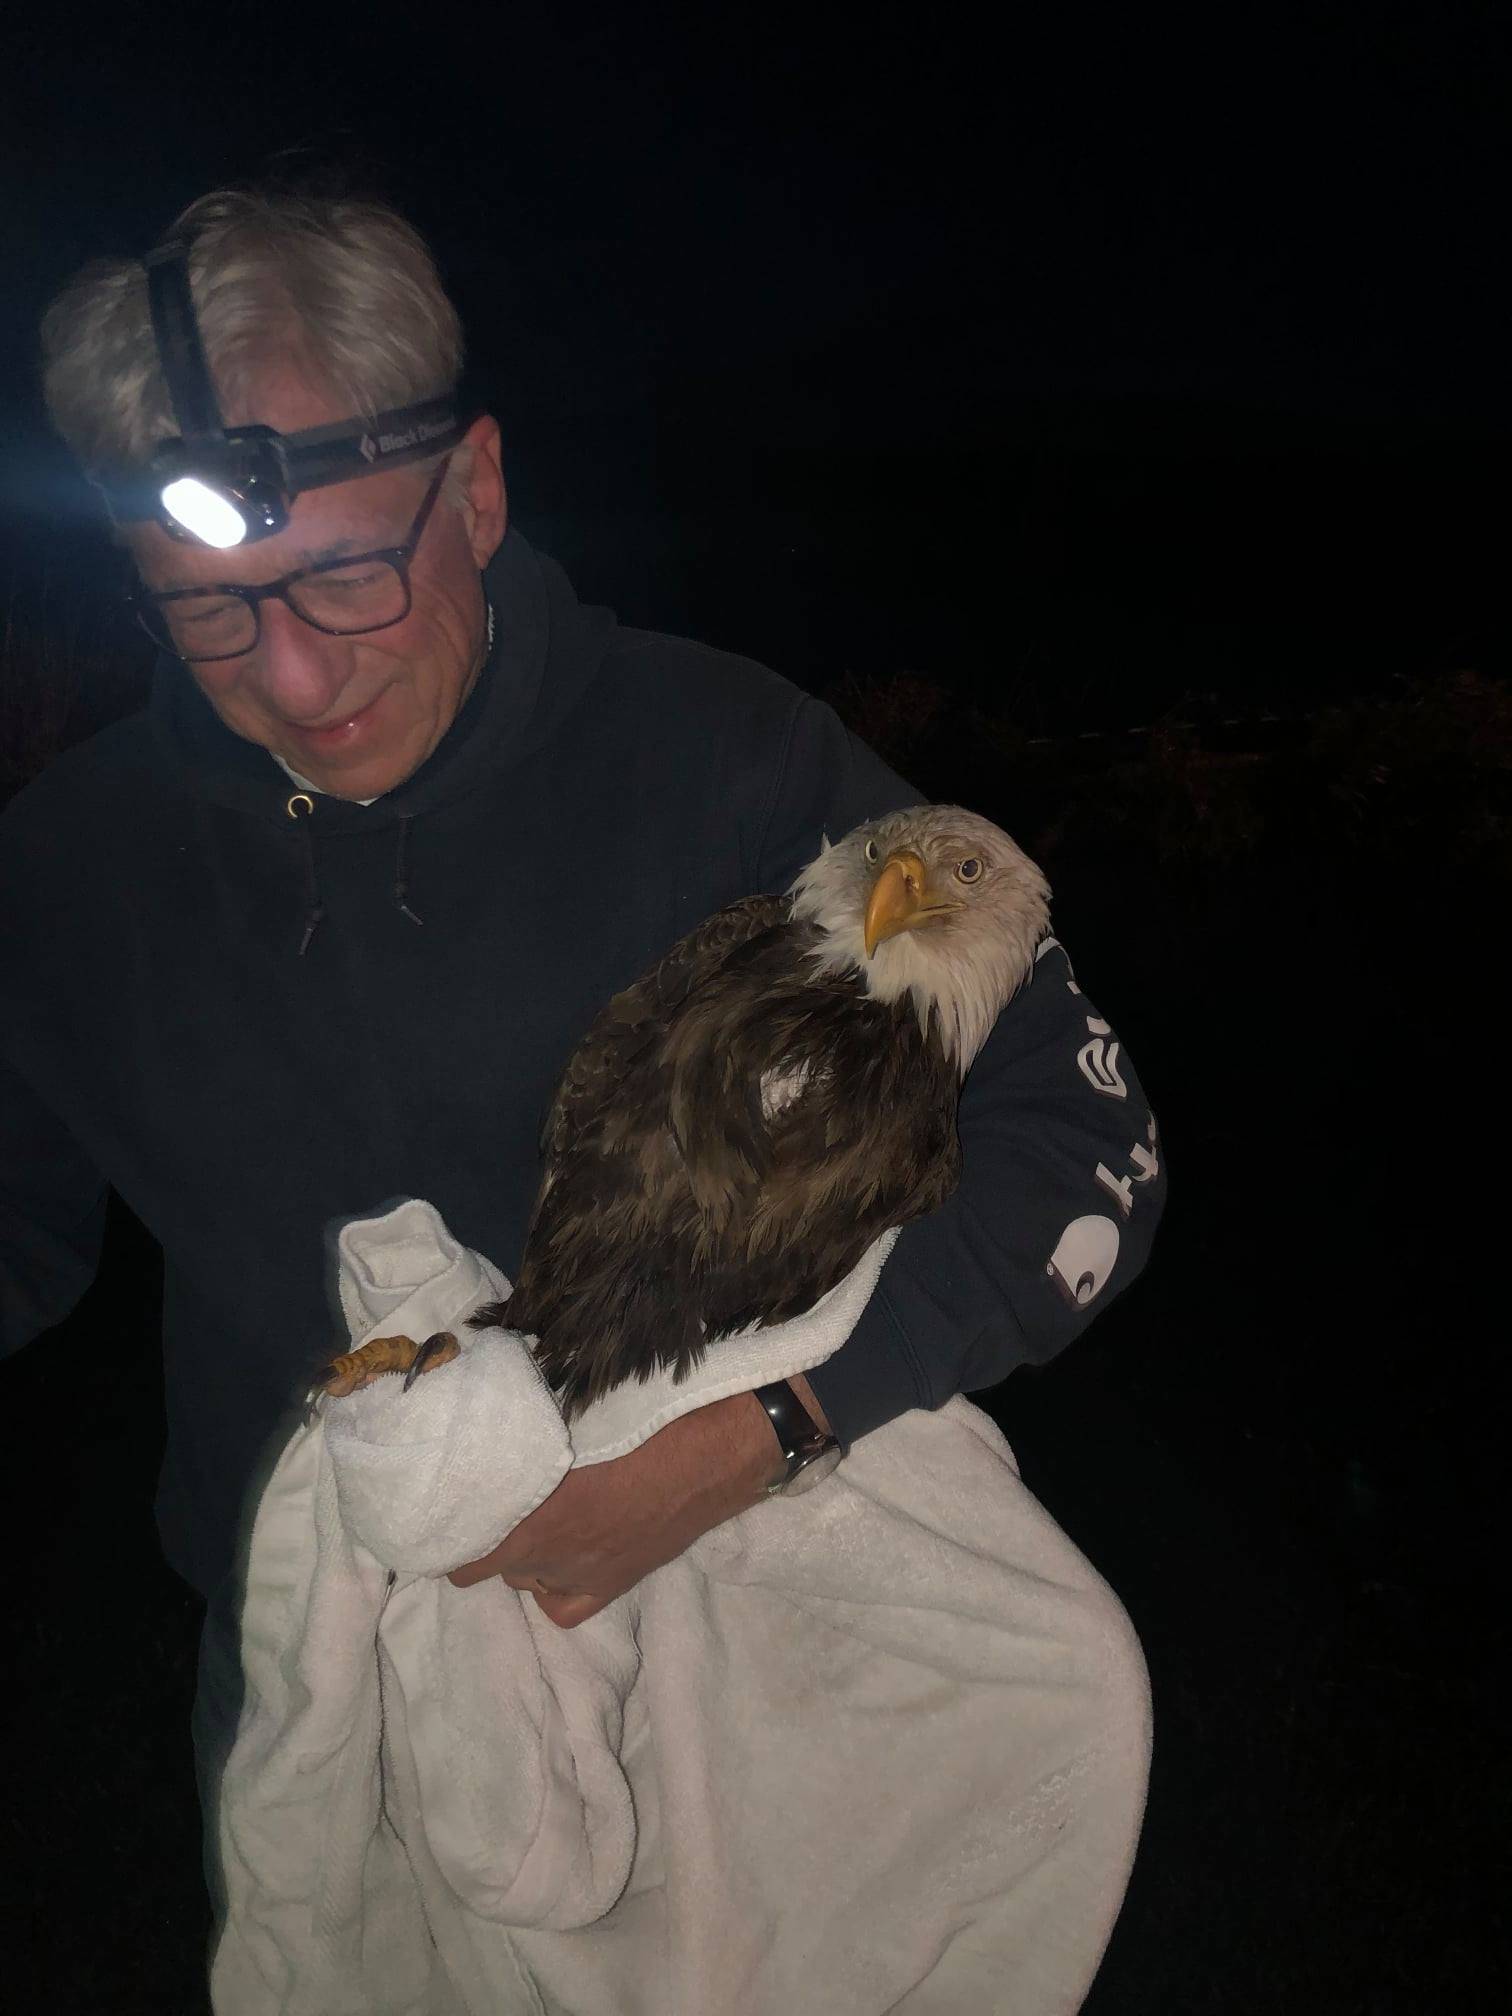 Dr. David Parent with the eagle he rescued near Lone Lake Sunday night. Photo provided